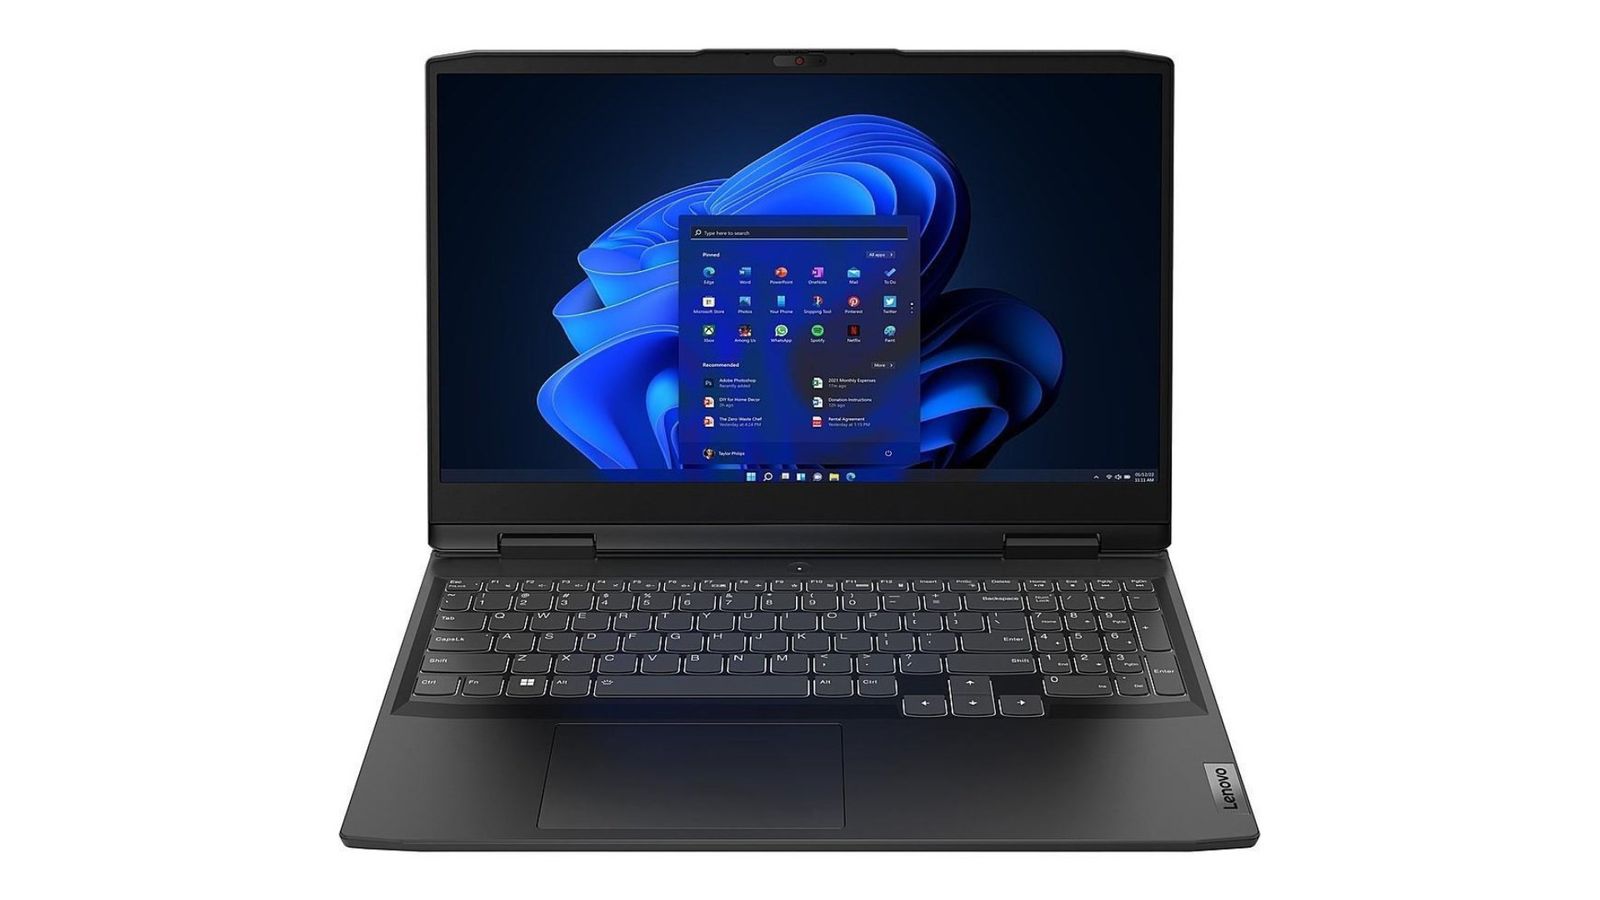 Lenovo IdeaPad Gaming 3 product image of a black laptop with Windows 11 on the display.